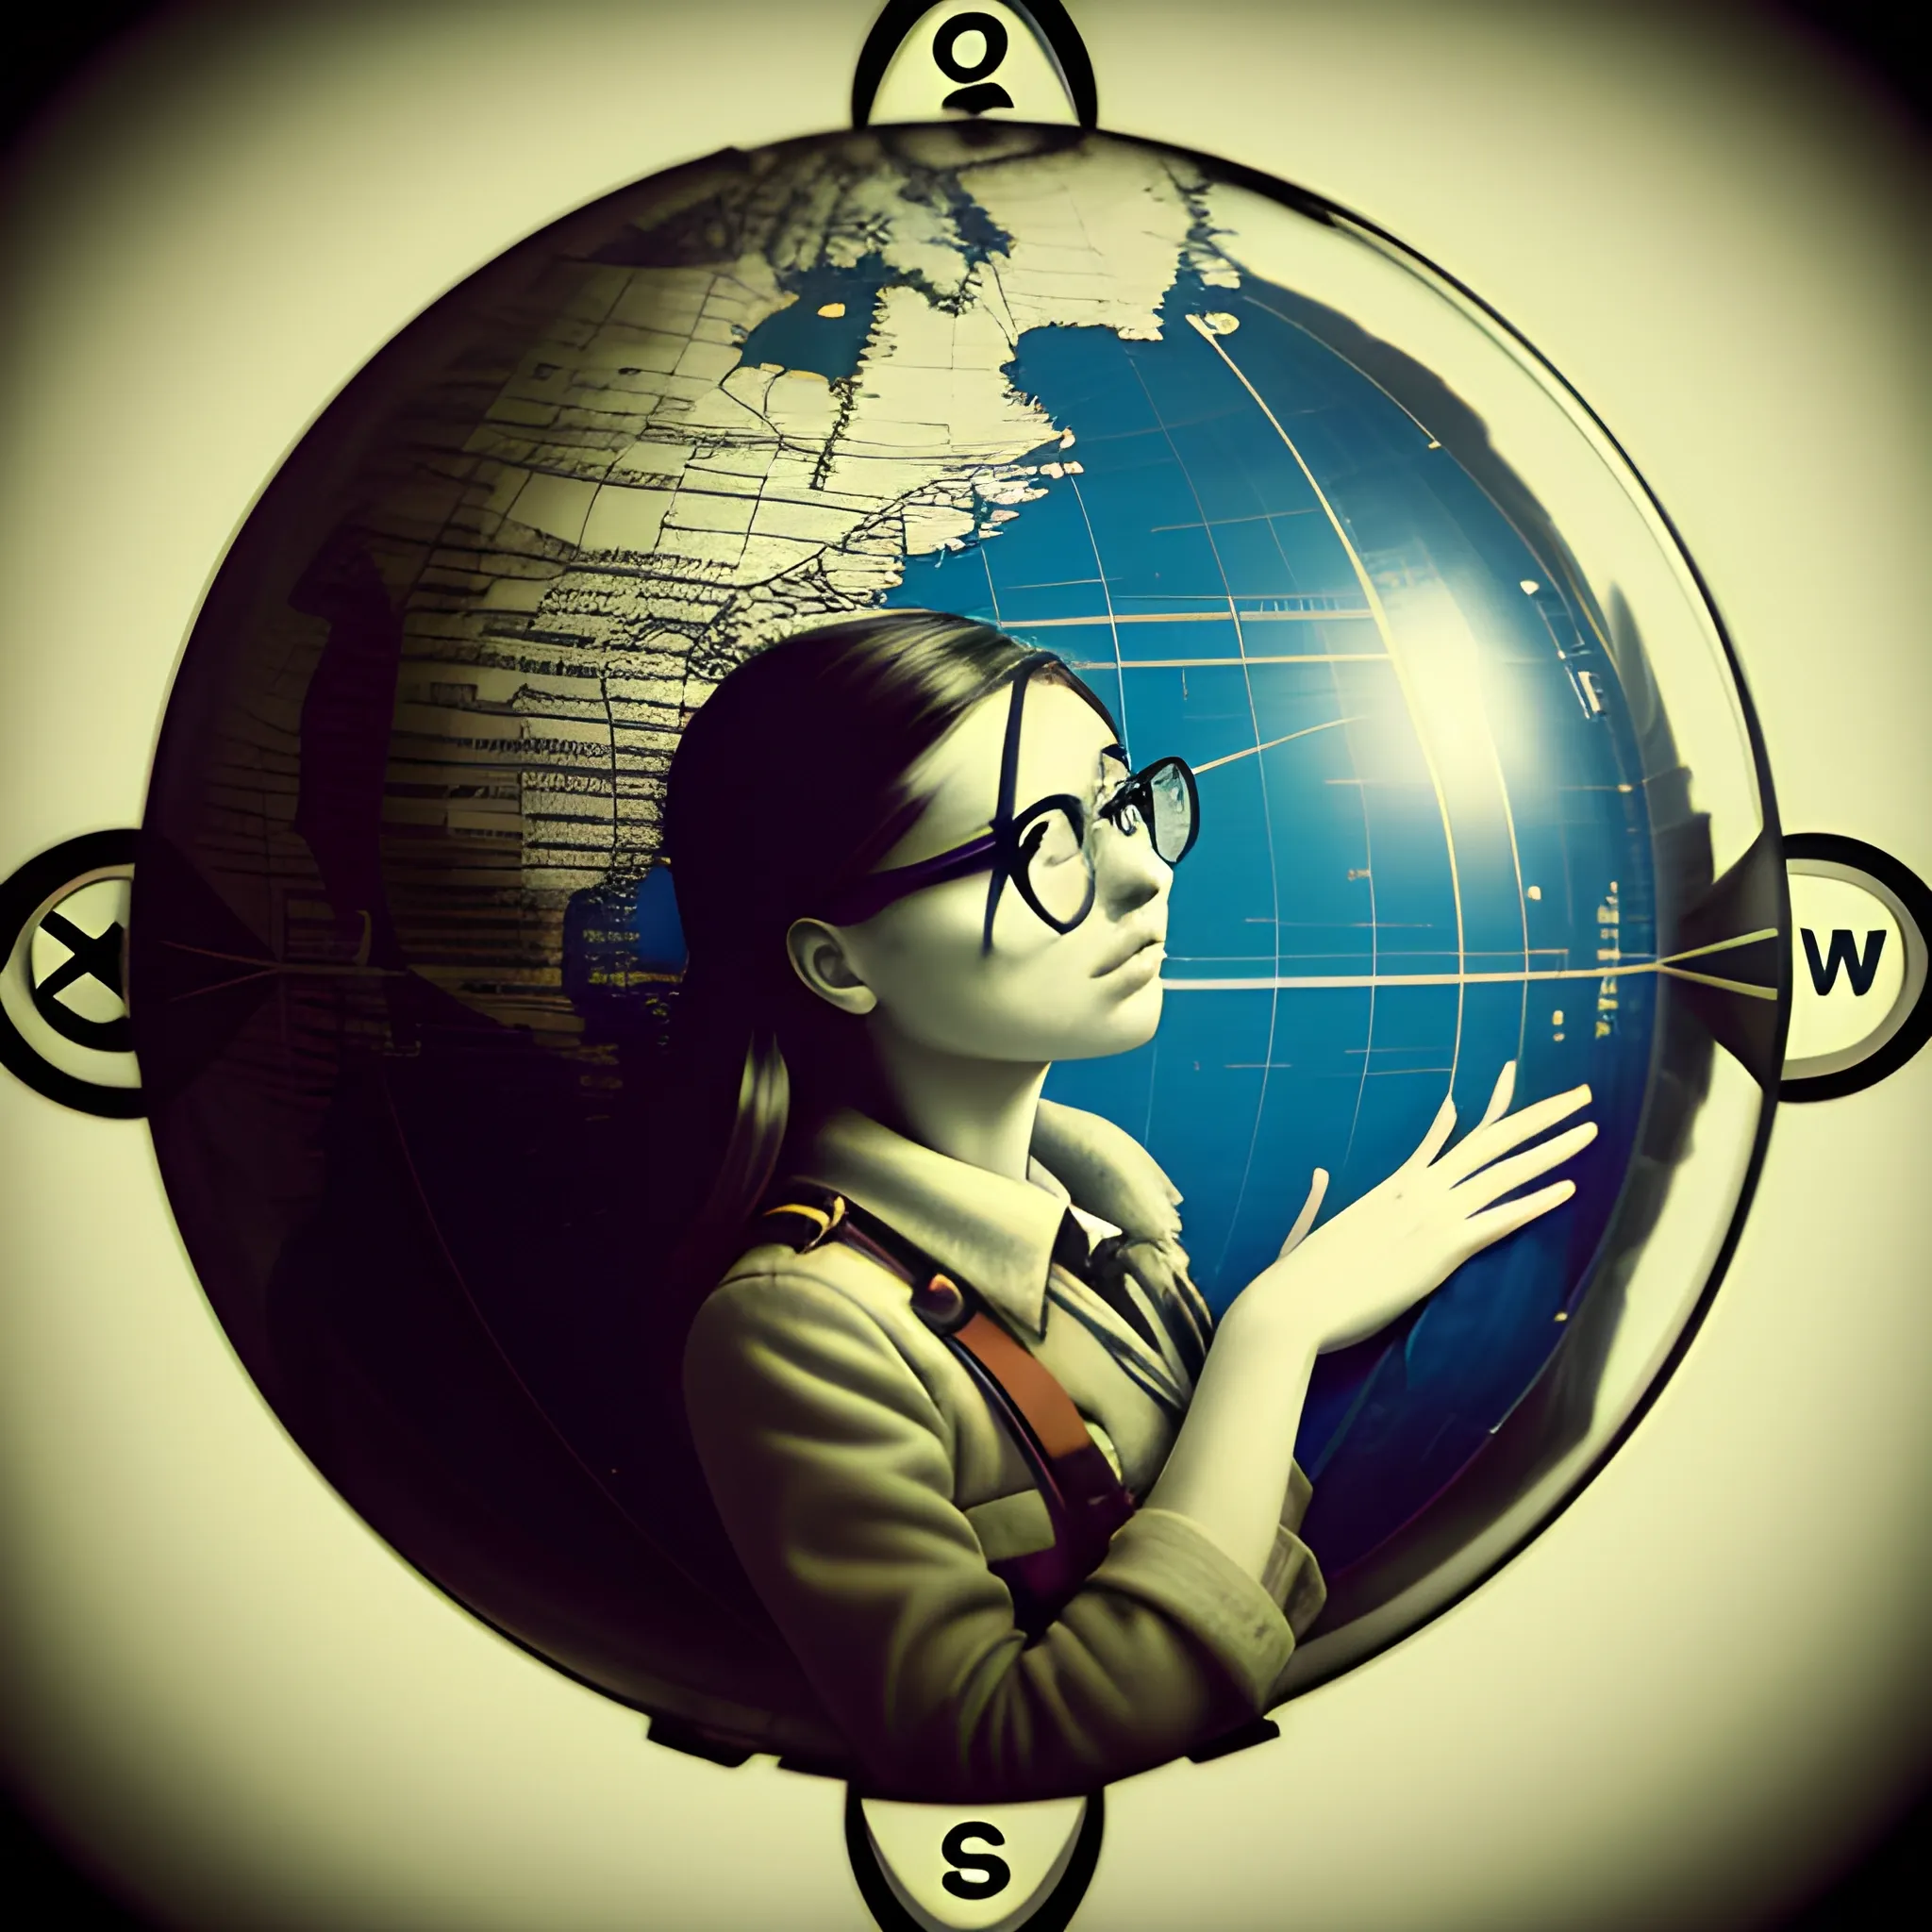 make a portrait of a female explorer standing by a window, leaning on a giant globe, compass glasses flying in the air, chaotic background, 3D, Trippy,  eerie atmosphere, close up, angular perspective , Pencil Sketch, Realism, Contemporary Documentary Photography